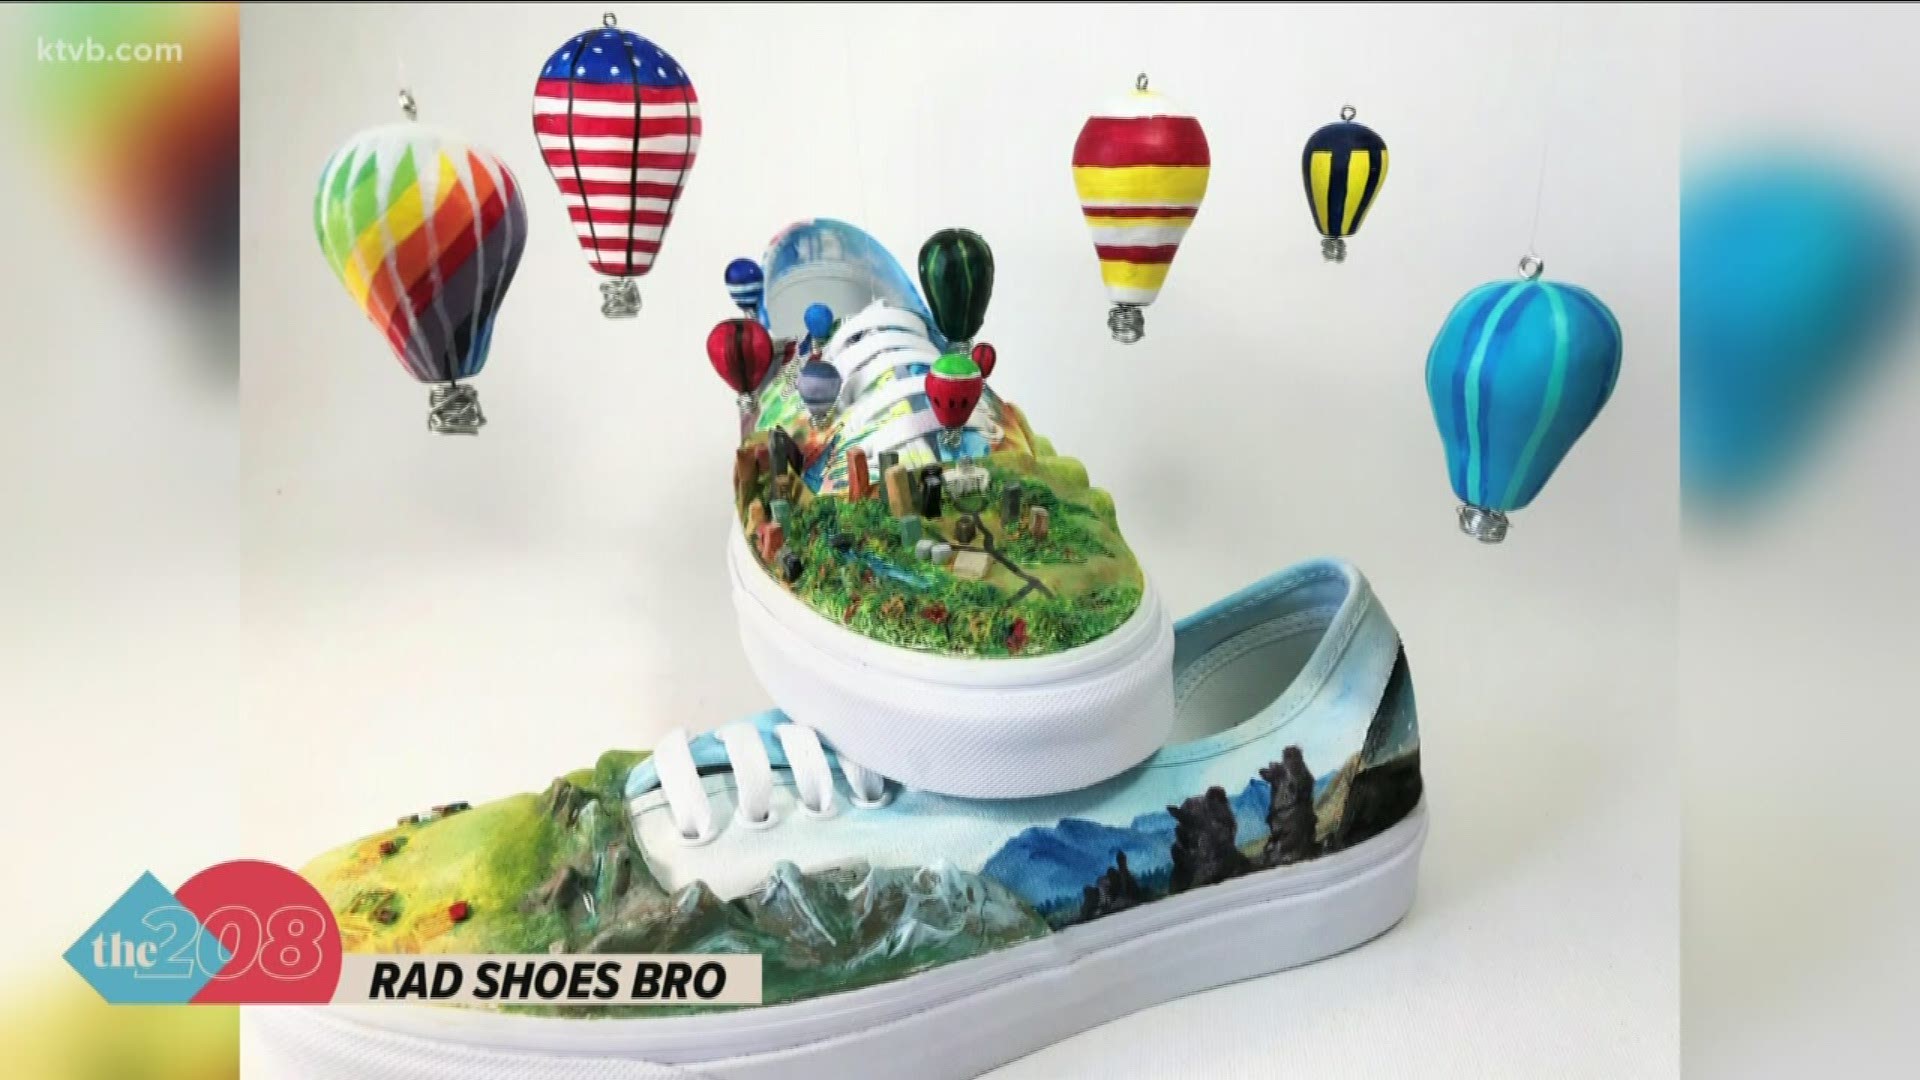 Students at Vallivue High School placed second in the national Vans Custom Culture contest by designing a physical show with the 'local flavor' of Idaho.